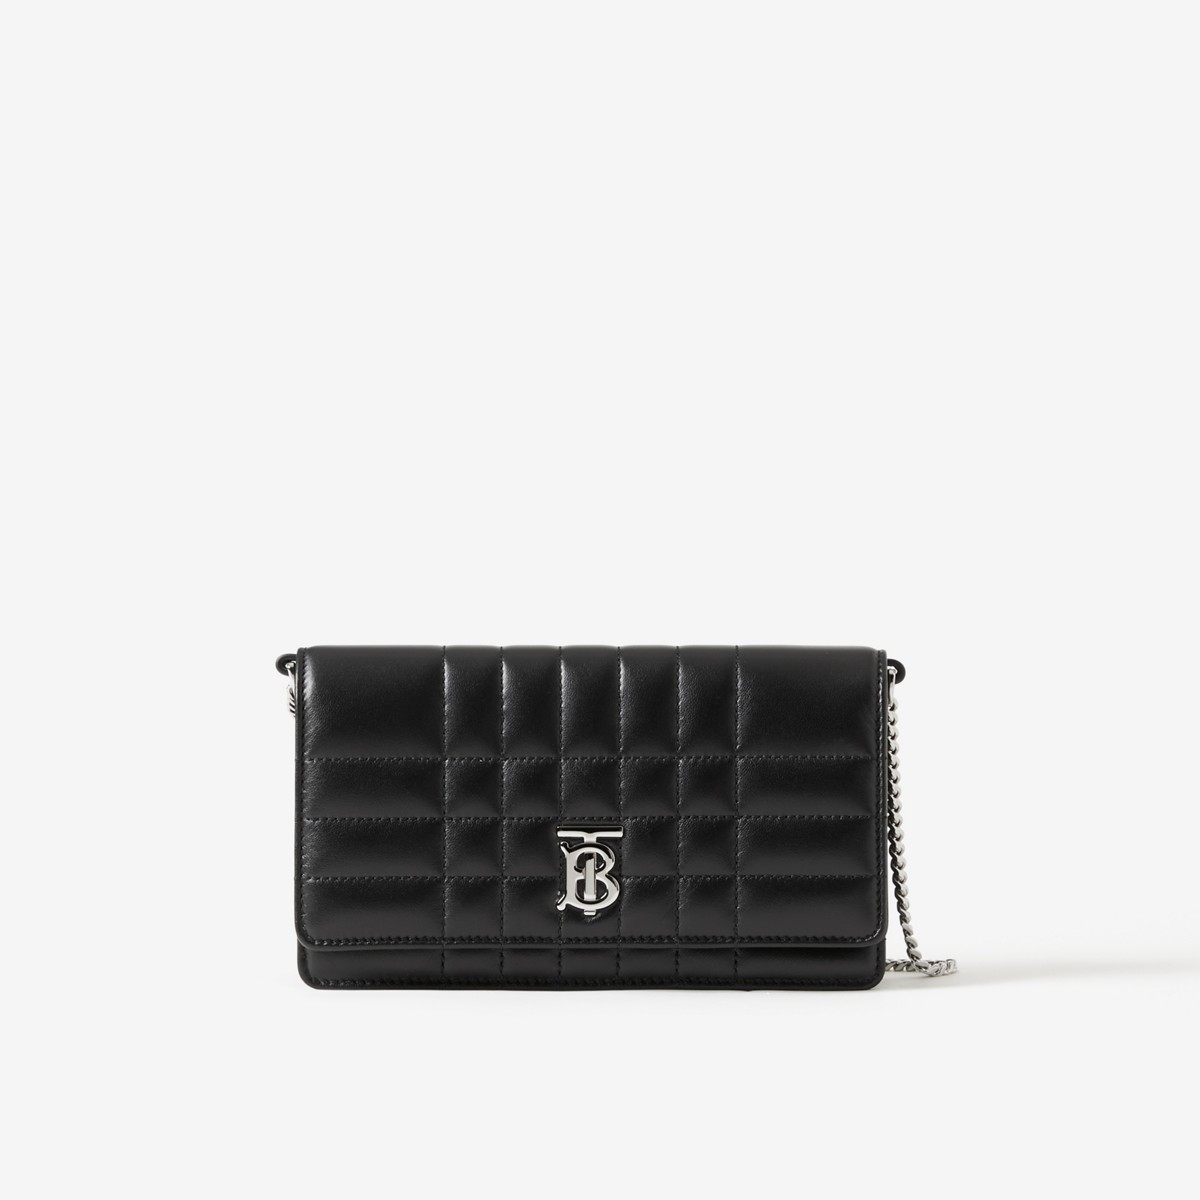 Burberry Quilted Leather Lola Clutch In Black/palladium